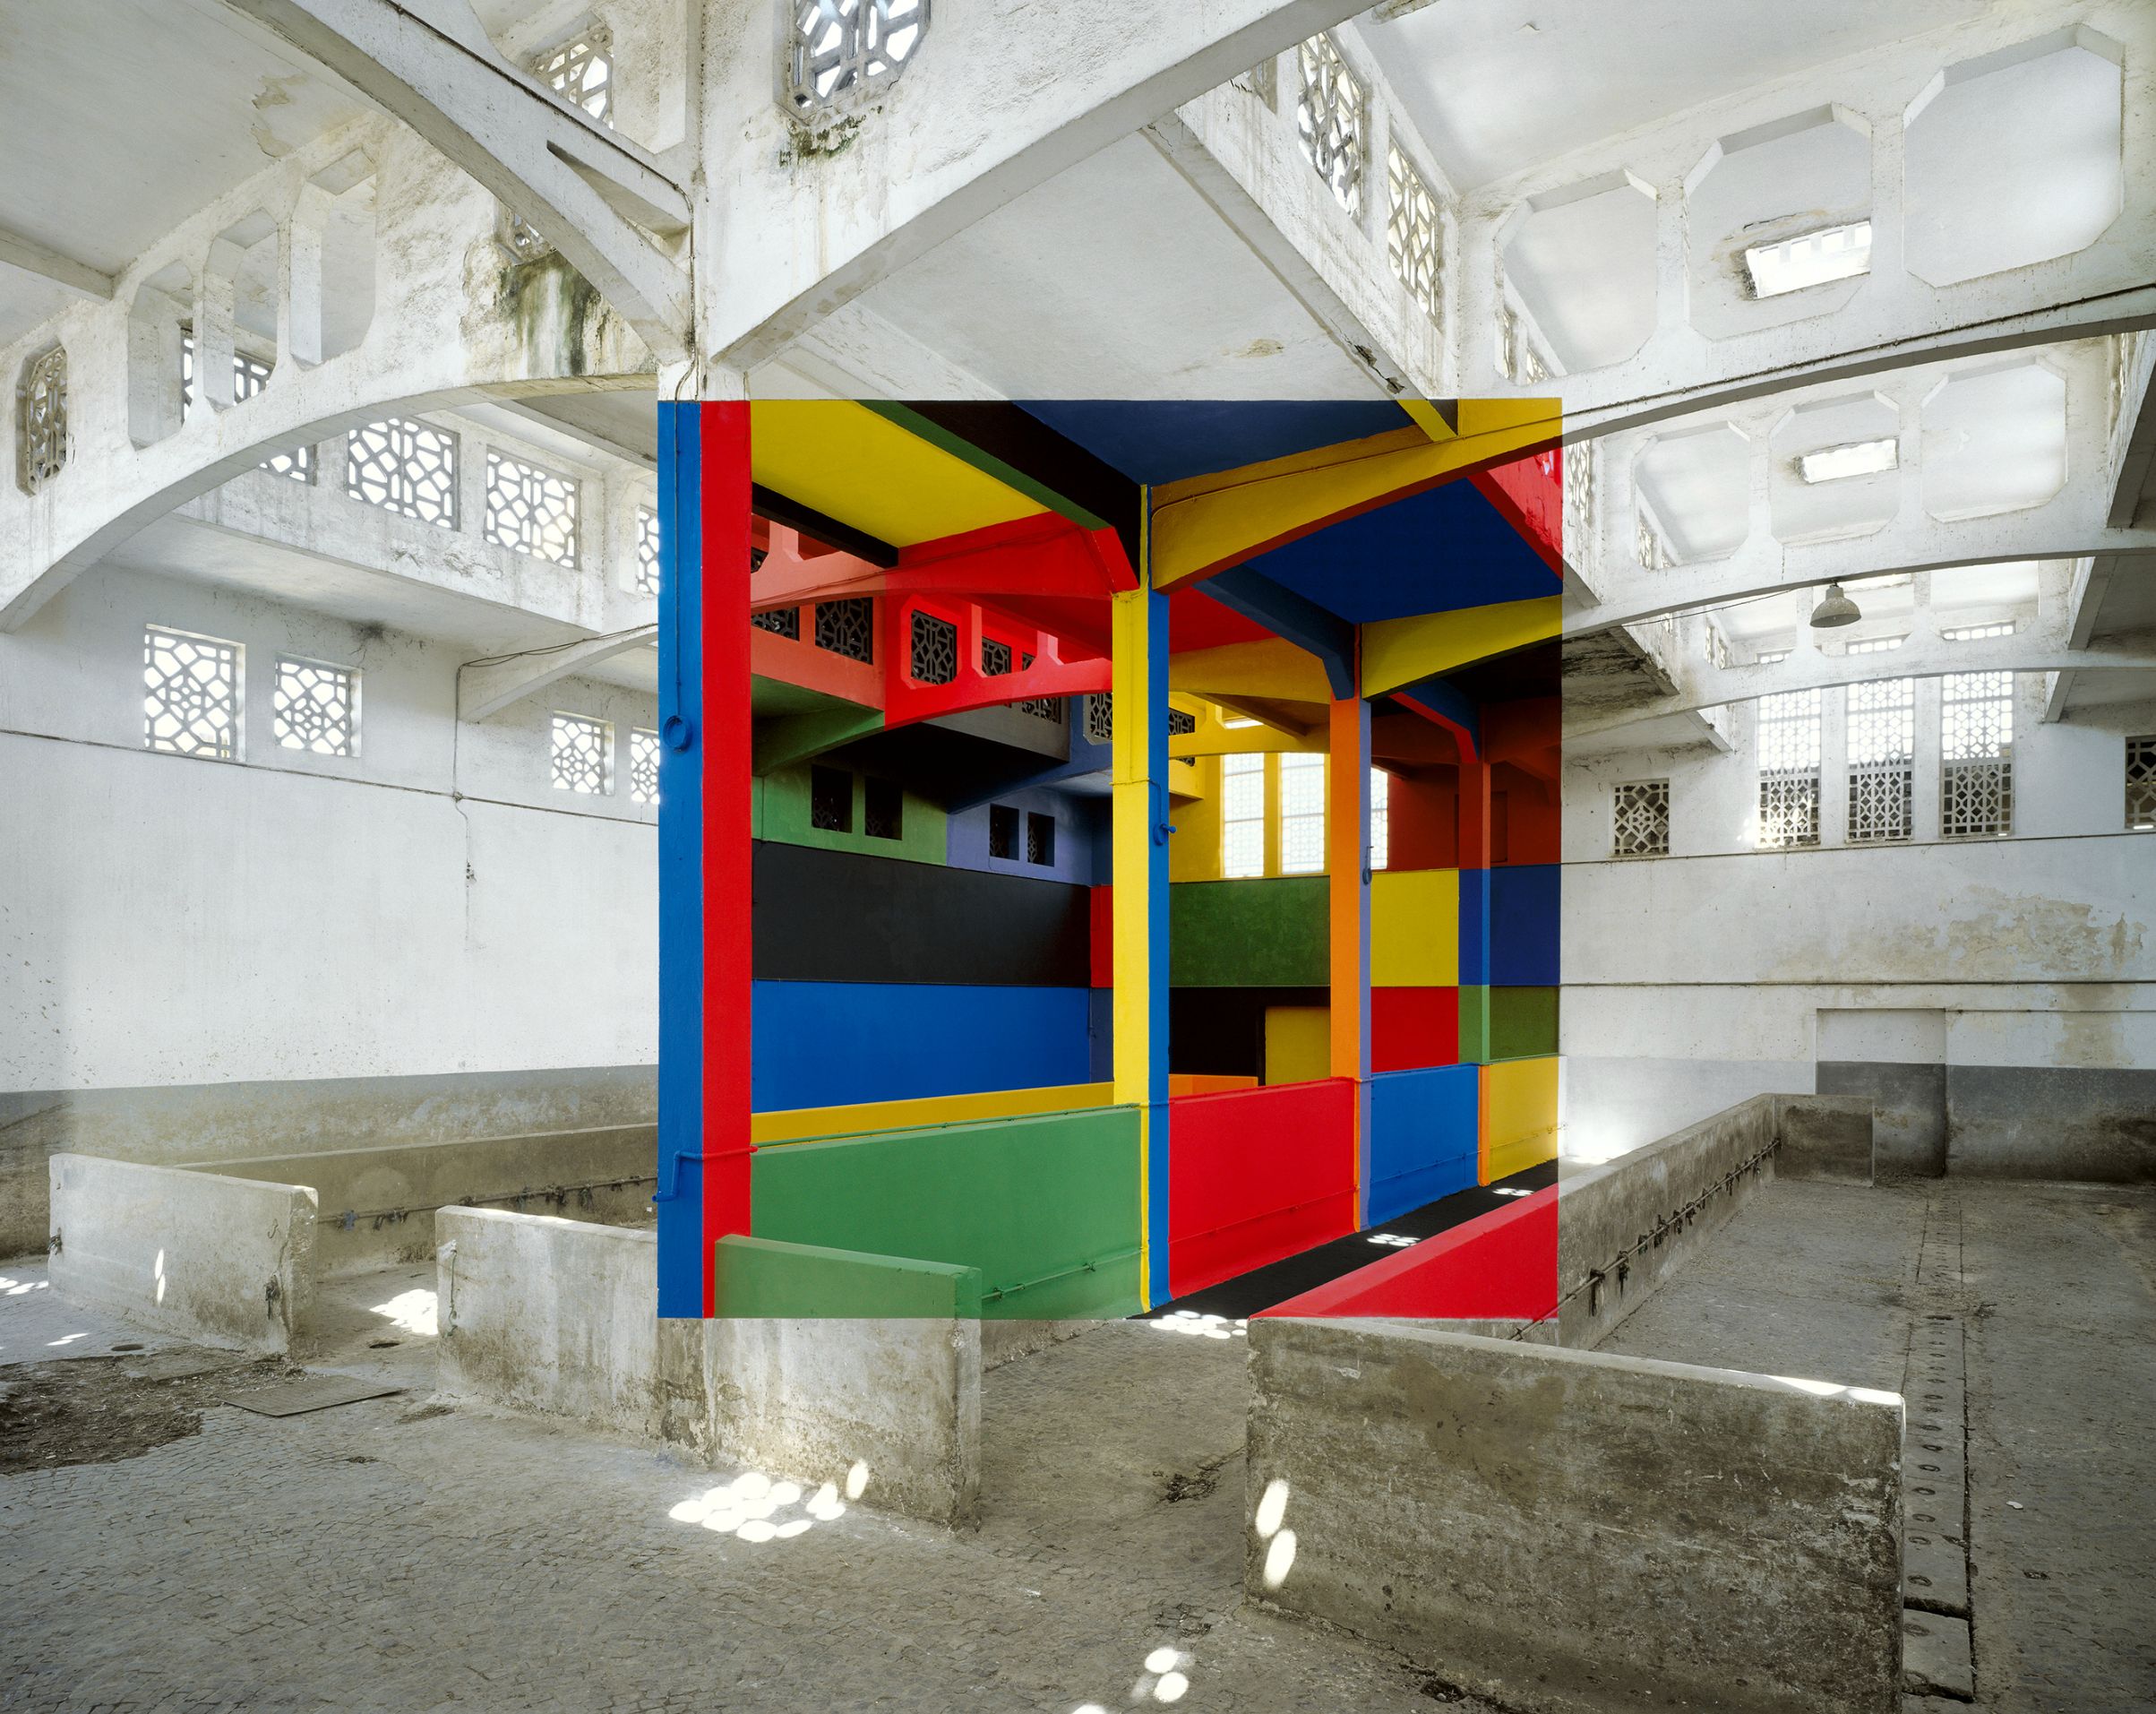 The work of Georges Rousse, a French artist who has been creating his painted perspective installations in abandoned and soon-to-be demolished buildings since the 1980's.